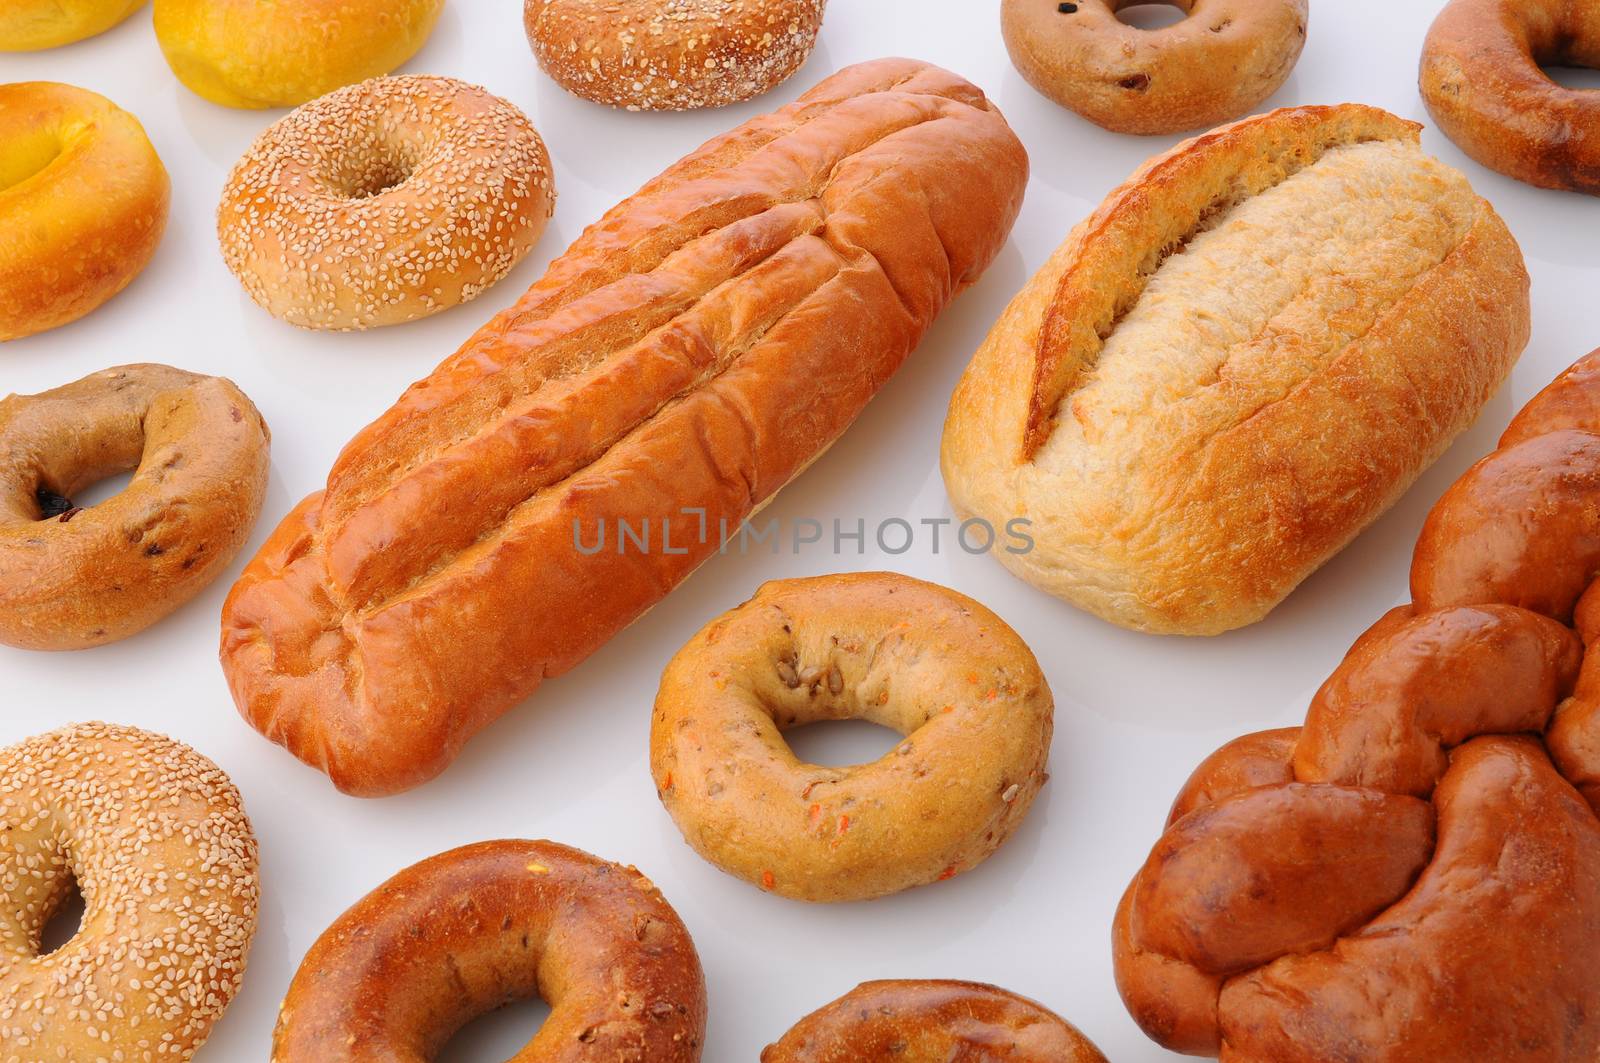 A large group of breads and bagels viewed for overhead on white with reflection. Items include: sesame seed bagels, french breaad, italian bread, baguette and more.Horizontal format that fills the frame.